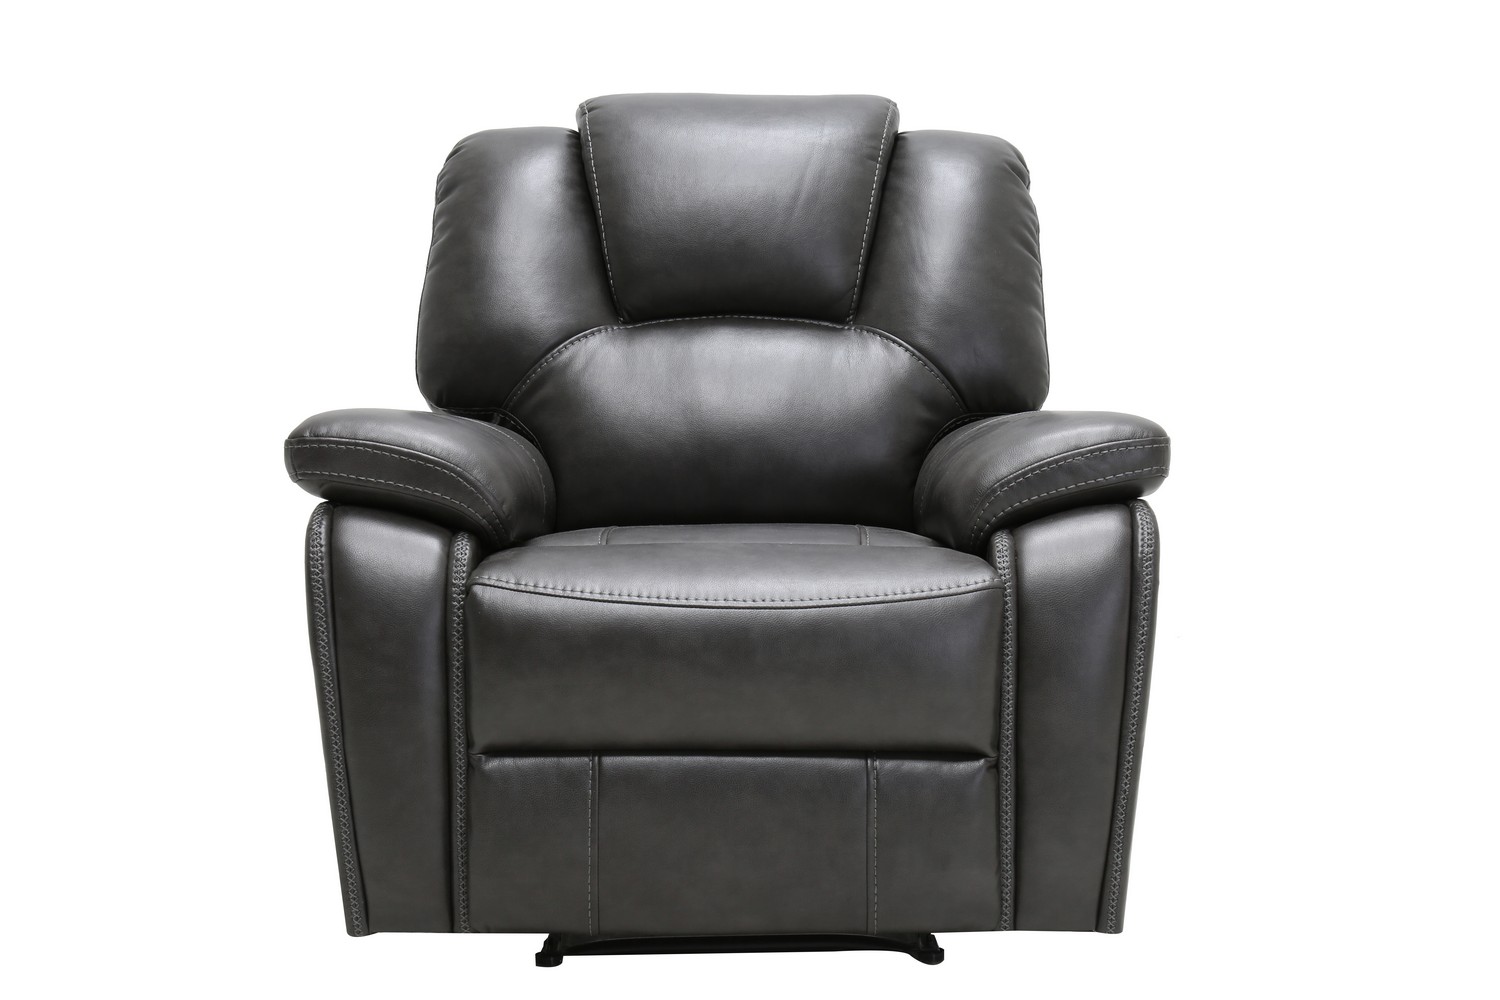 40" Grey Contemporary Leather Reclining Chair